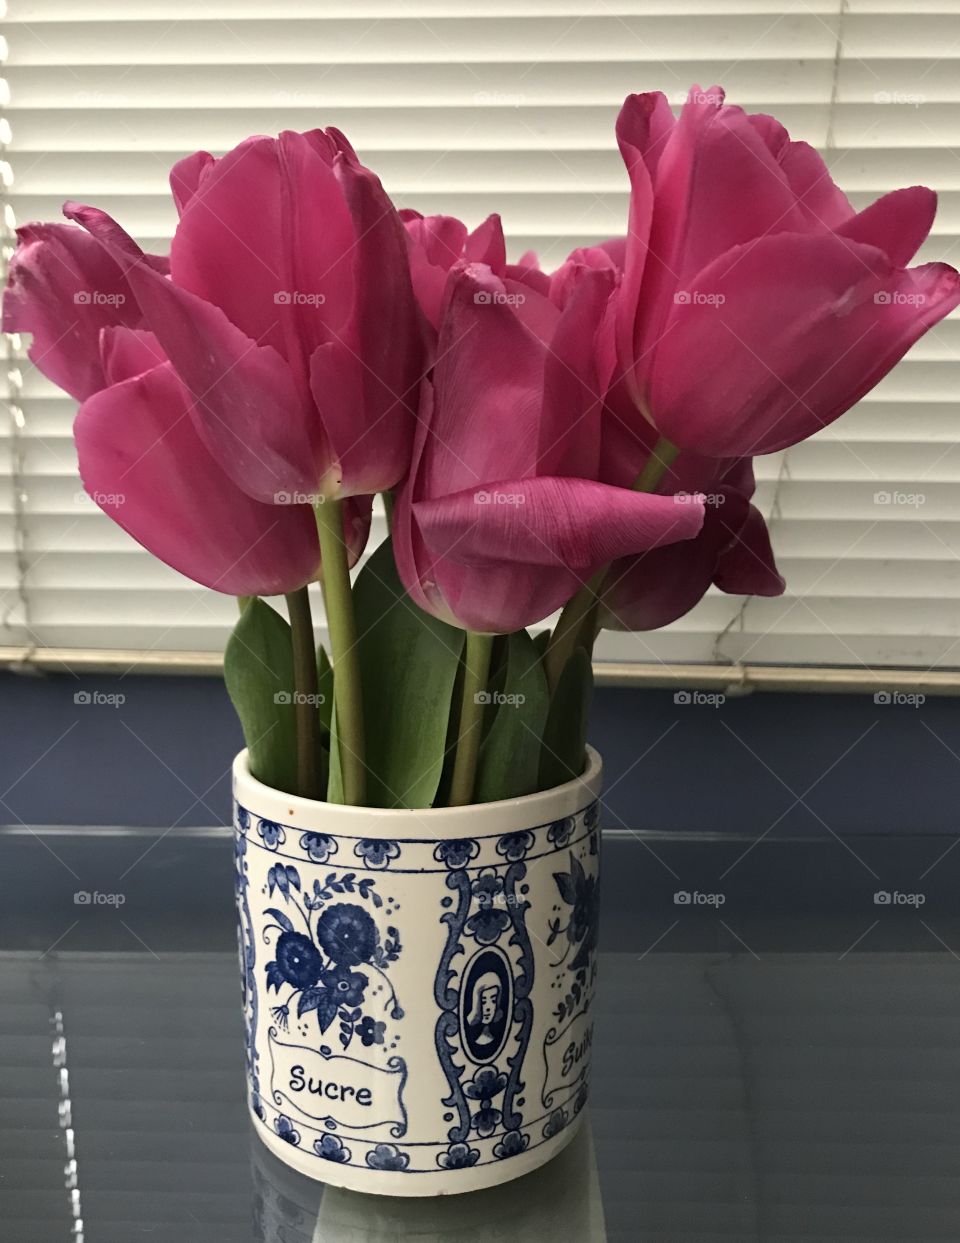 Vase and tulips 